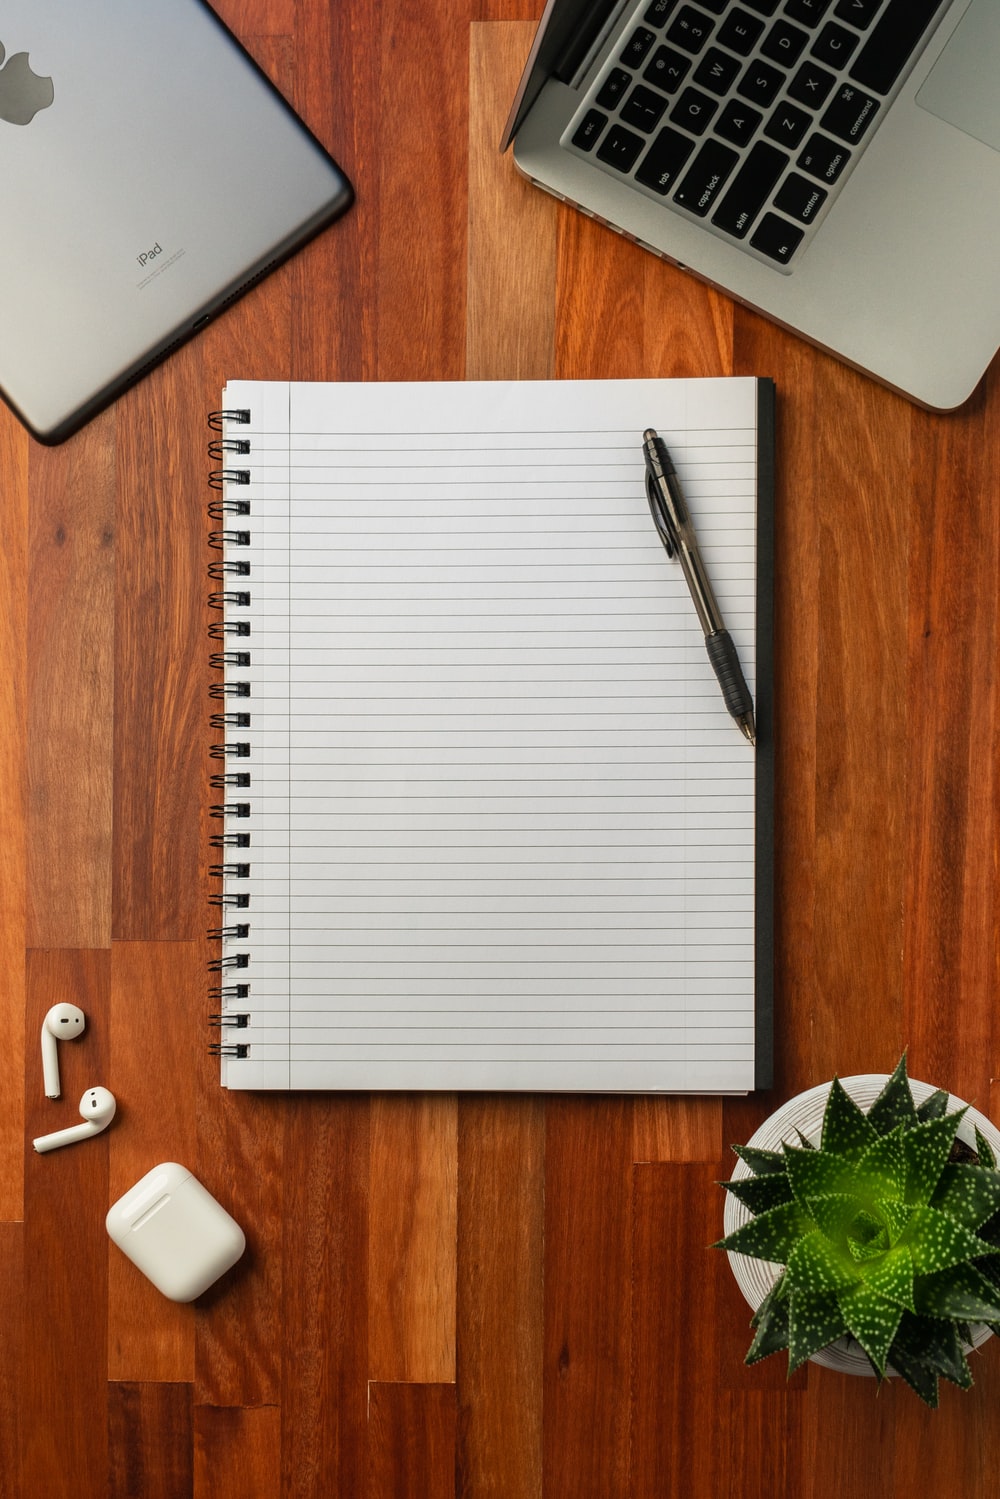 Notebook Paper Picture. Download Free Image